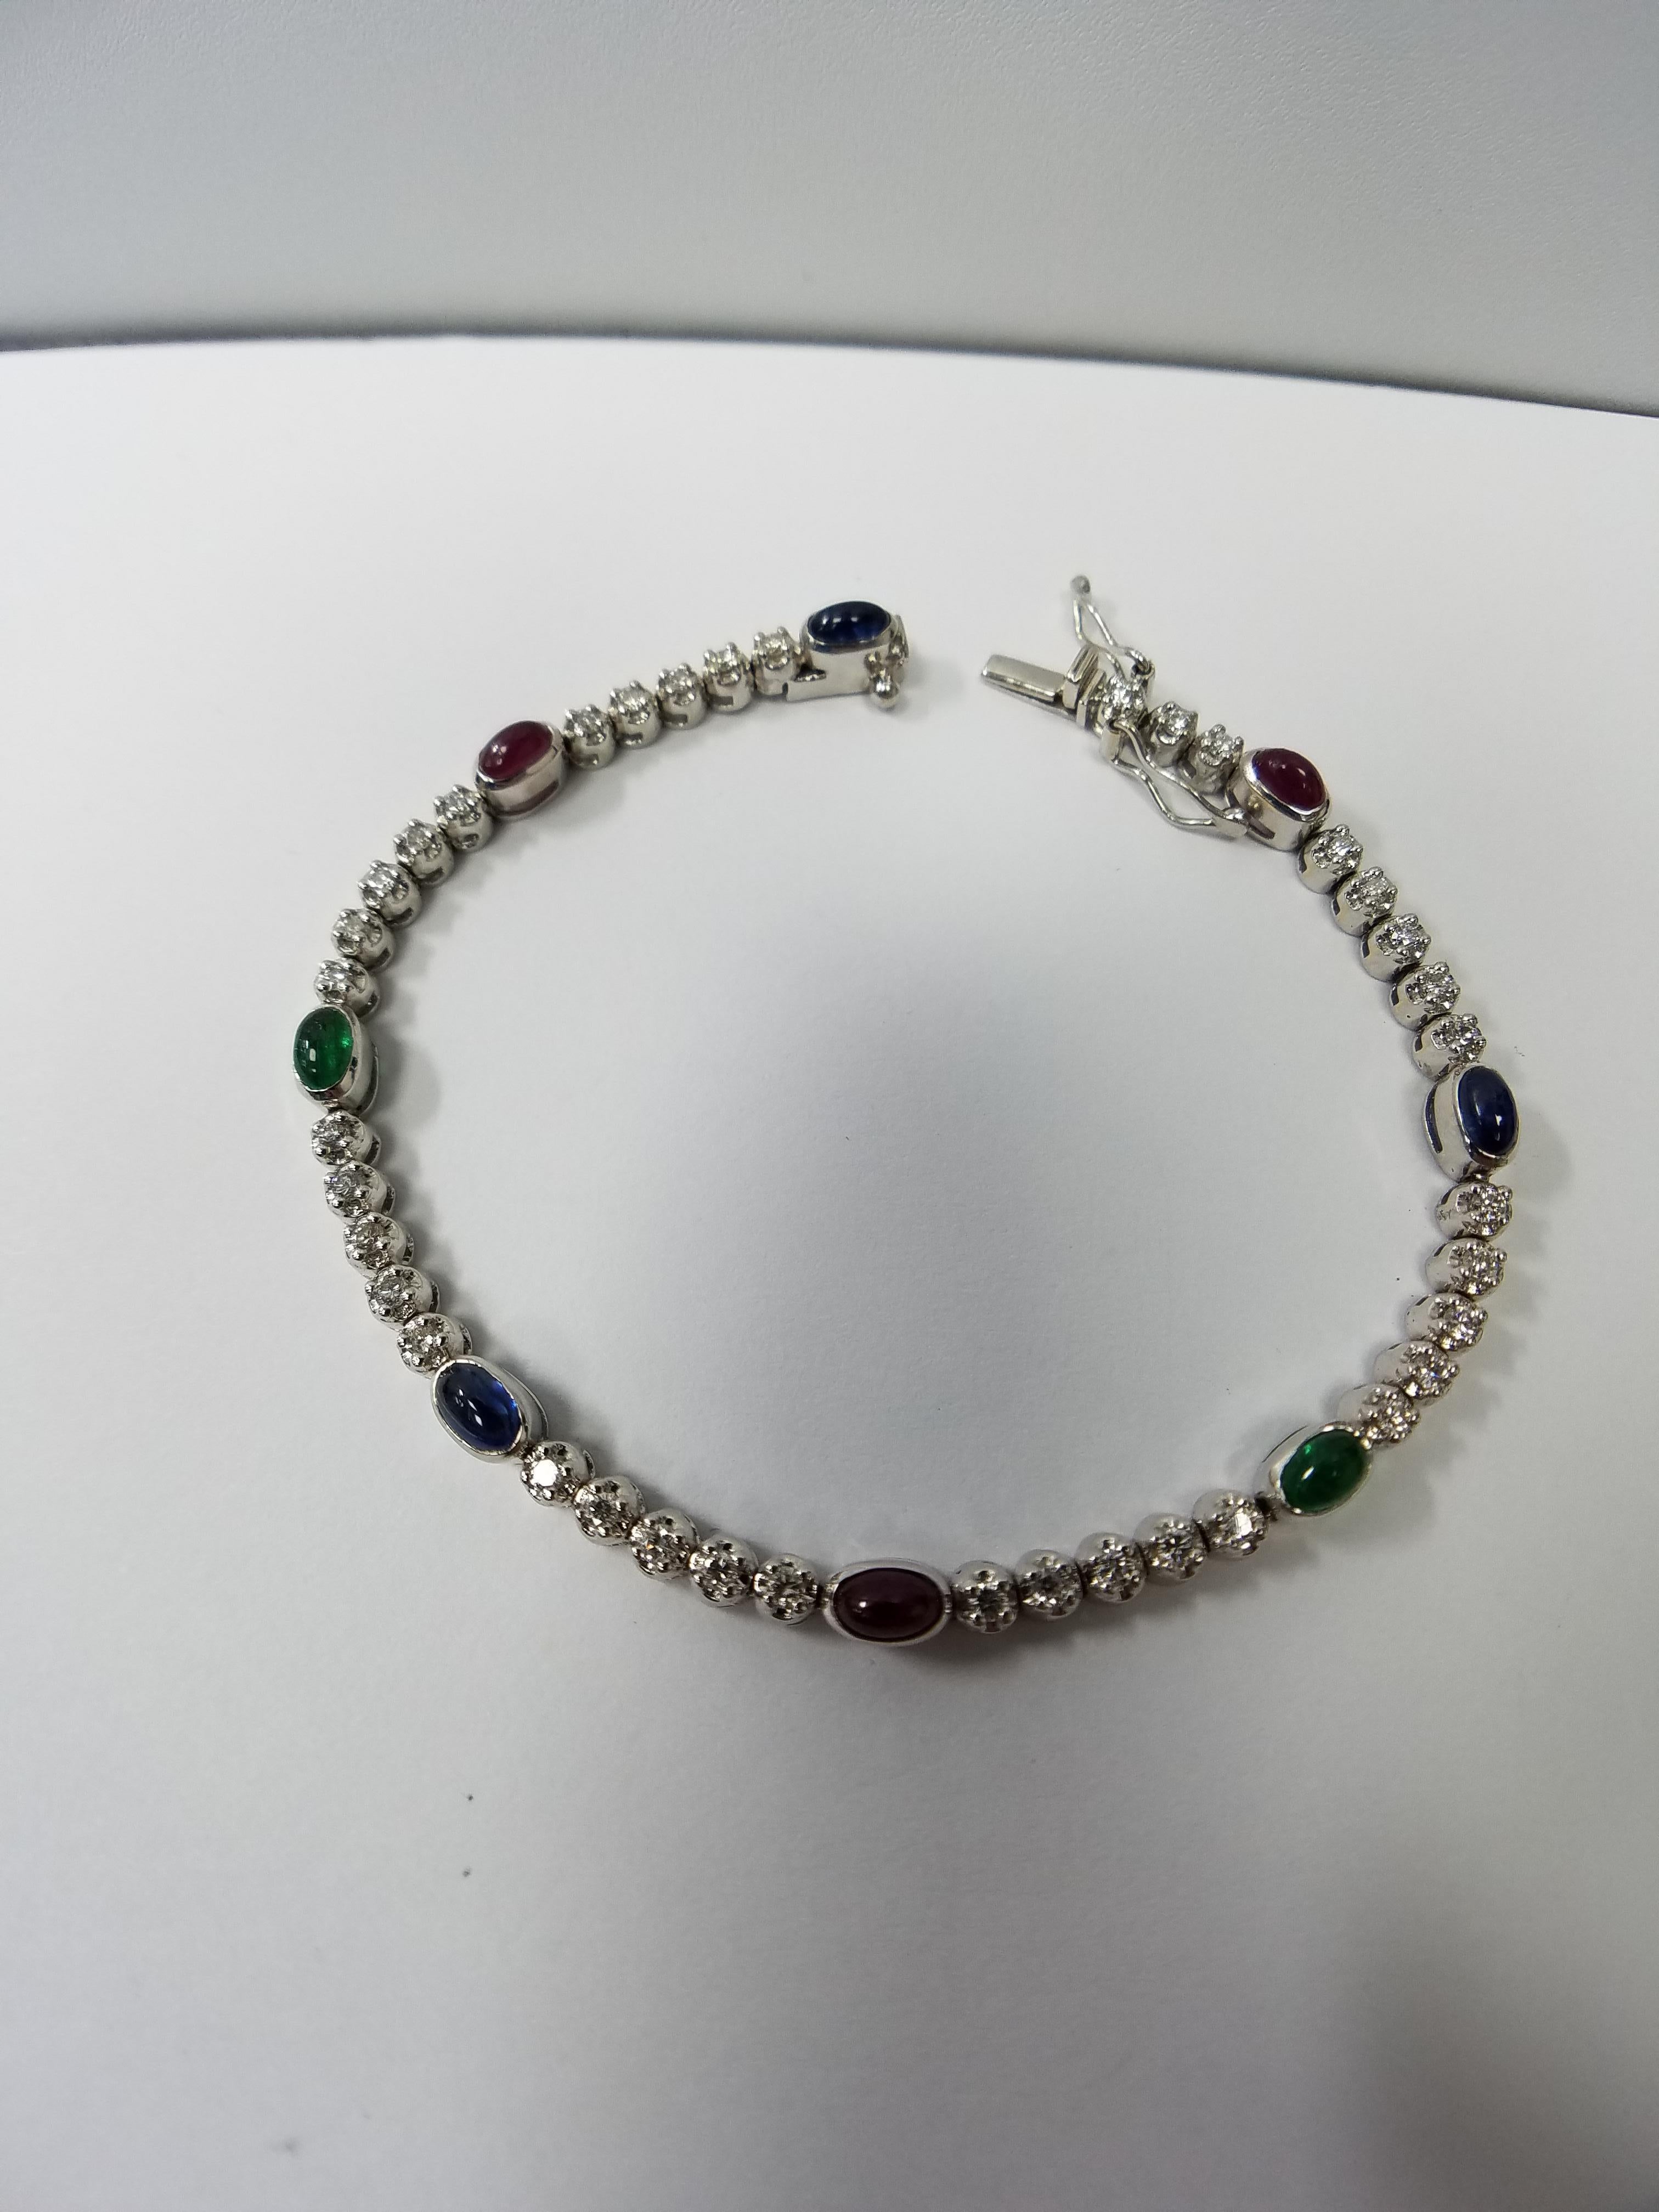 Women's 14 Karat White Gold with Diamond, Cabochon Ruby, Emerald and Sapphire